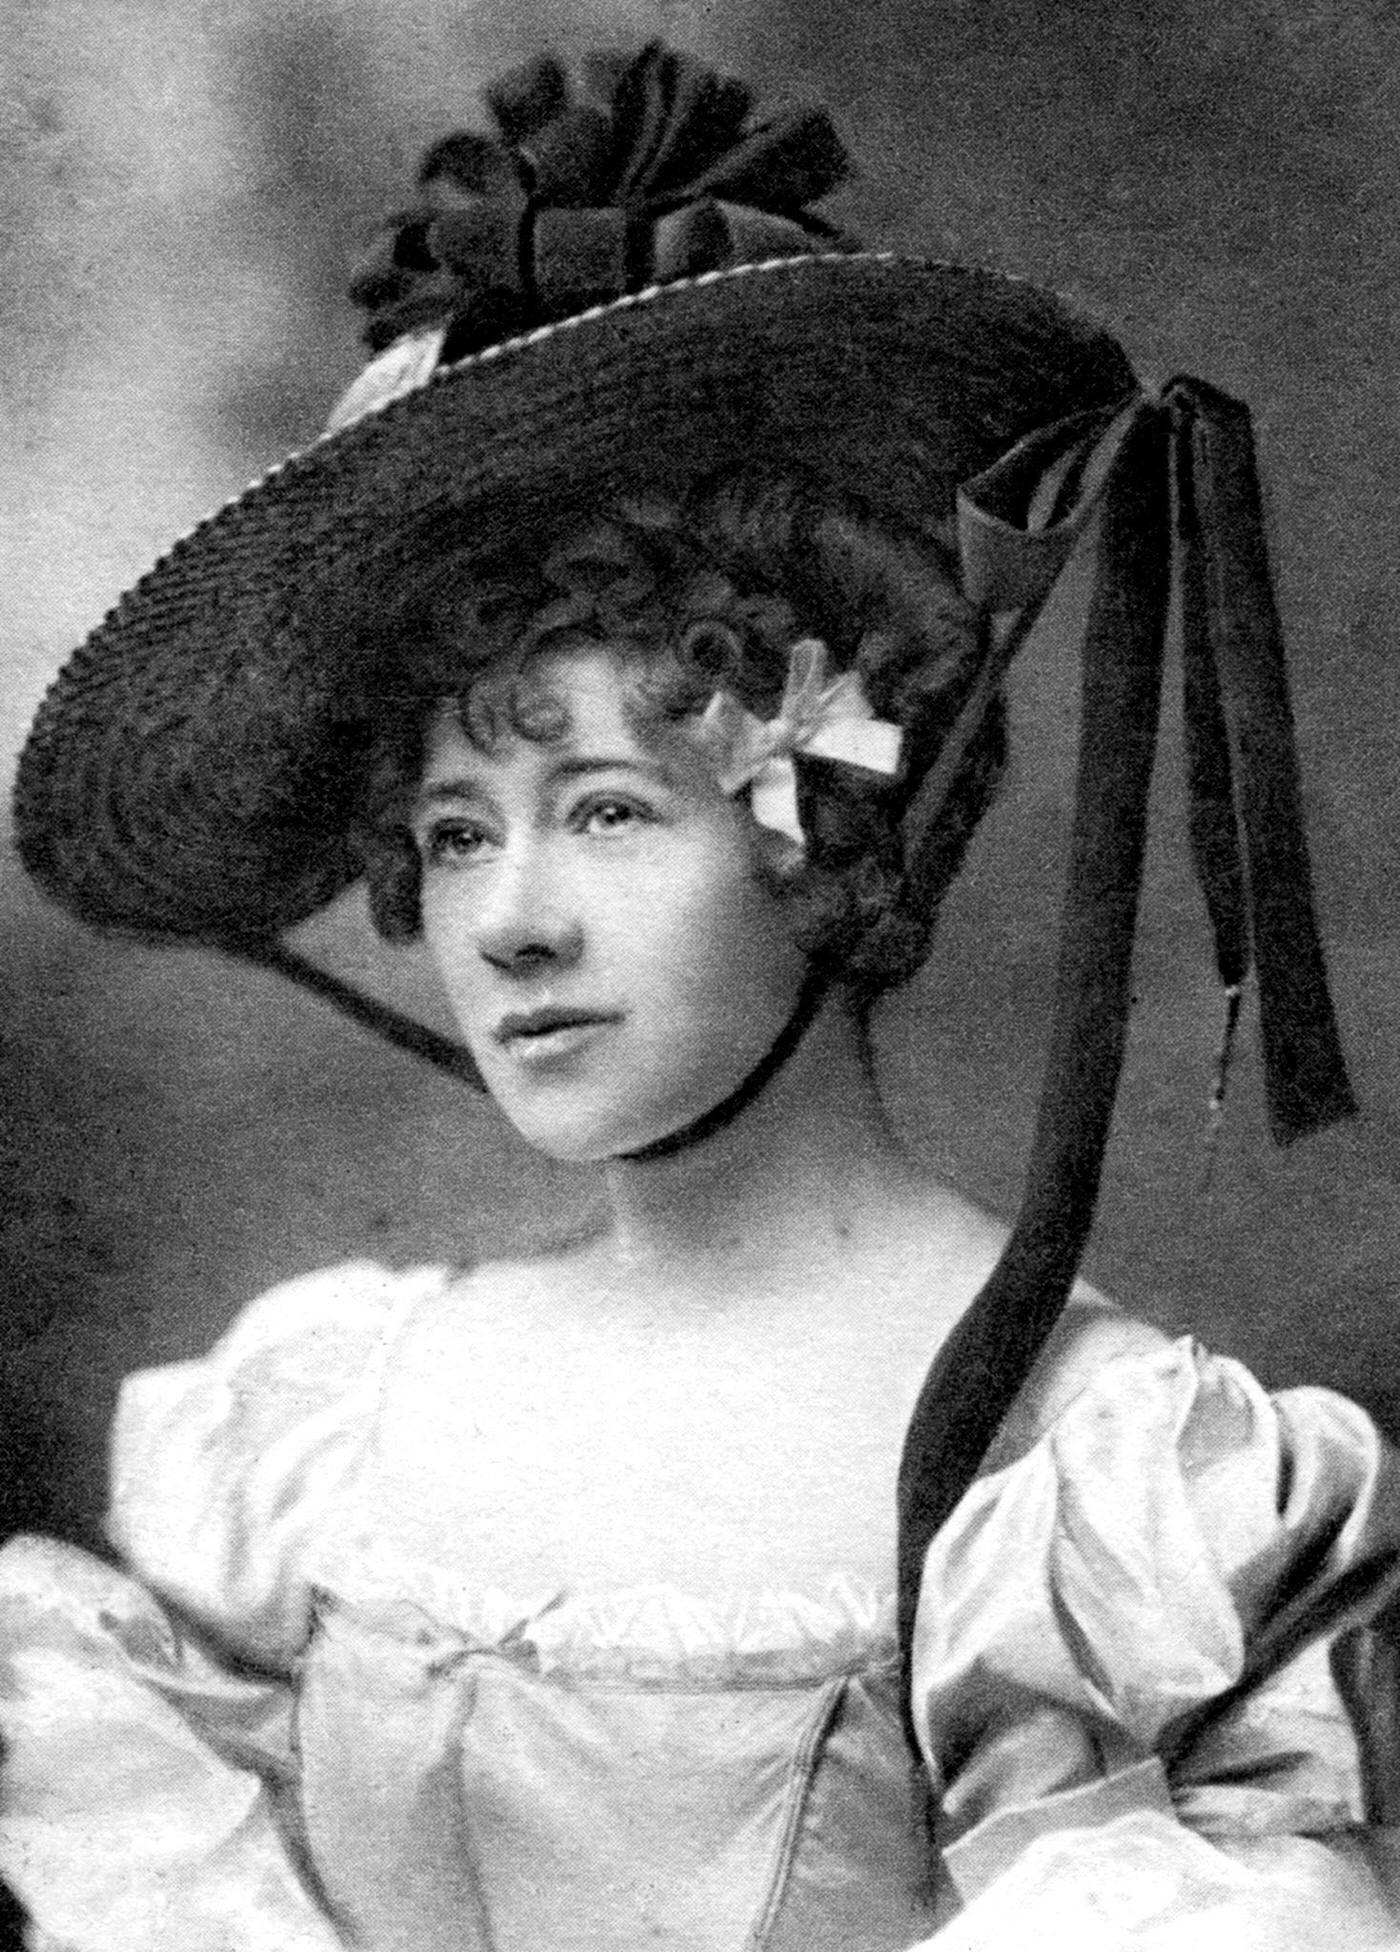 Madge Crichton poses elegantly for a portrait in 1904